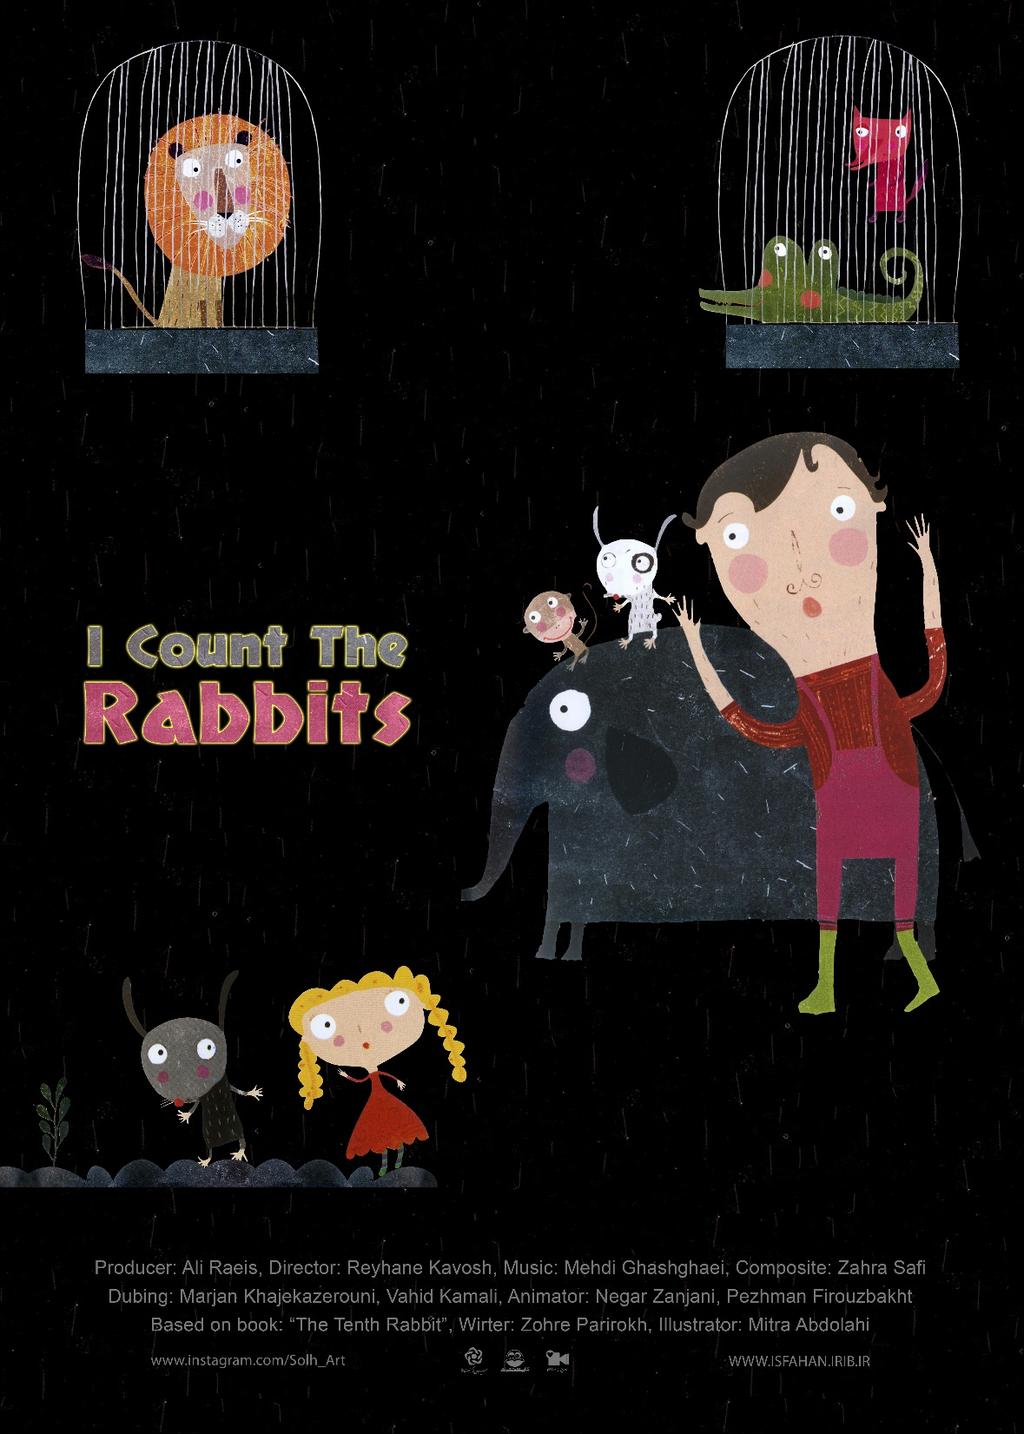 4. I Count the Rabbit Synopsis: Terme who can t fall into sleep decided to count rabbits instead of sheep. Suddenly one of the rabbits run out of the line and made the sleep escape.